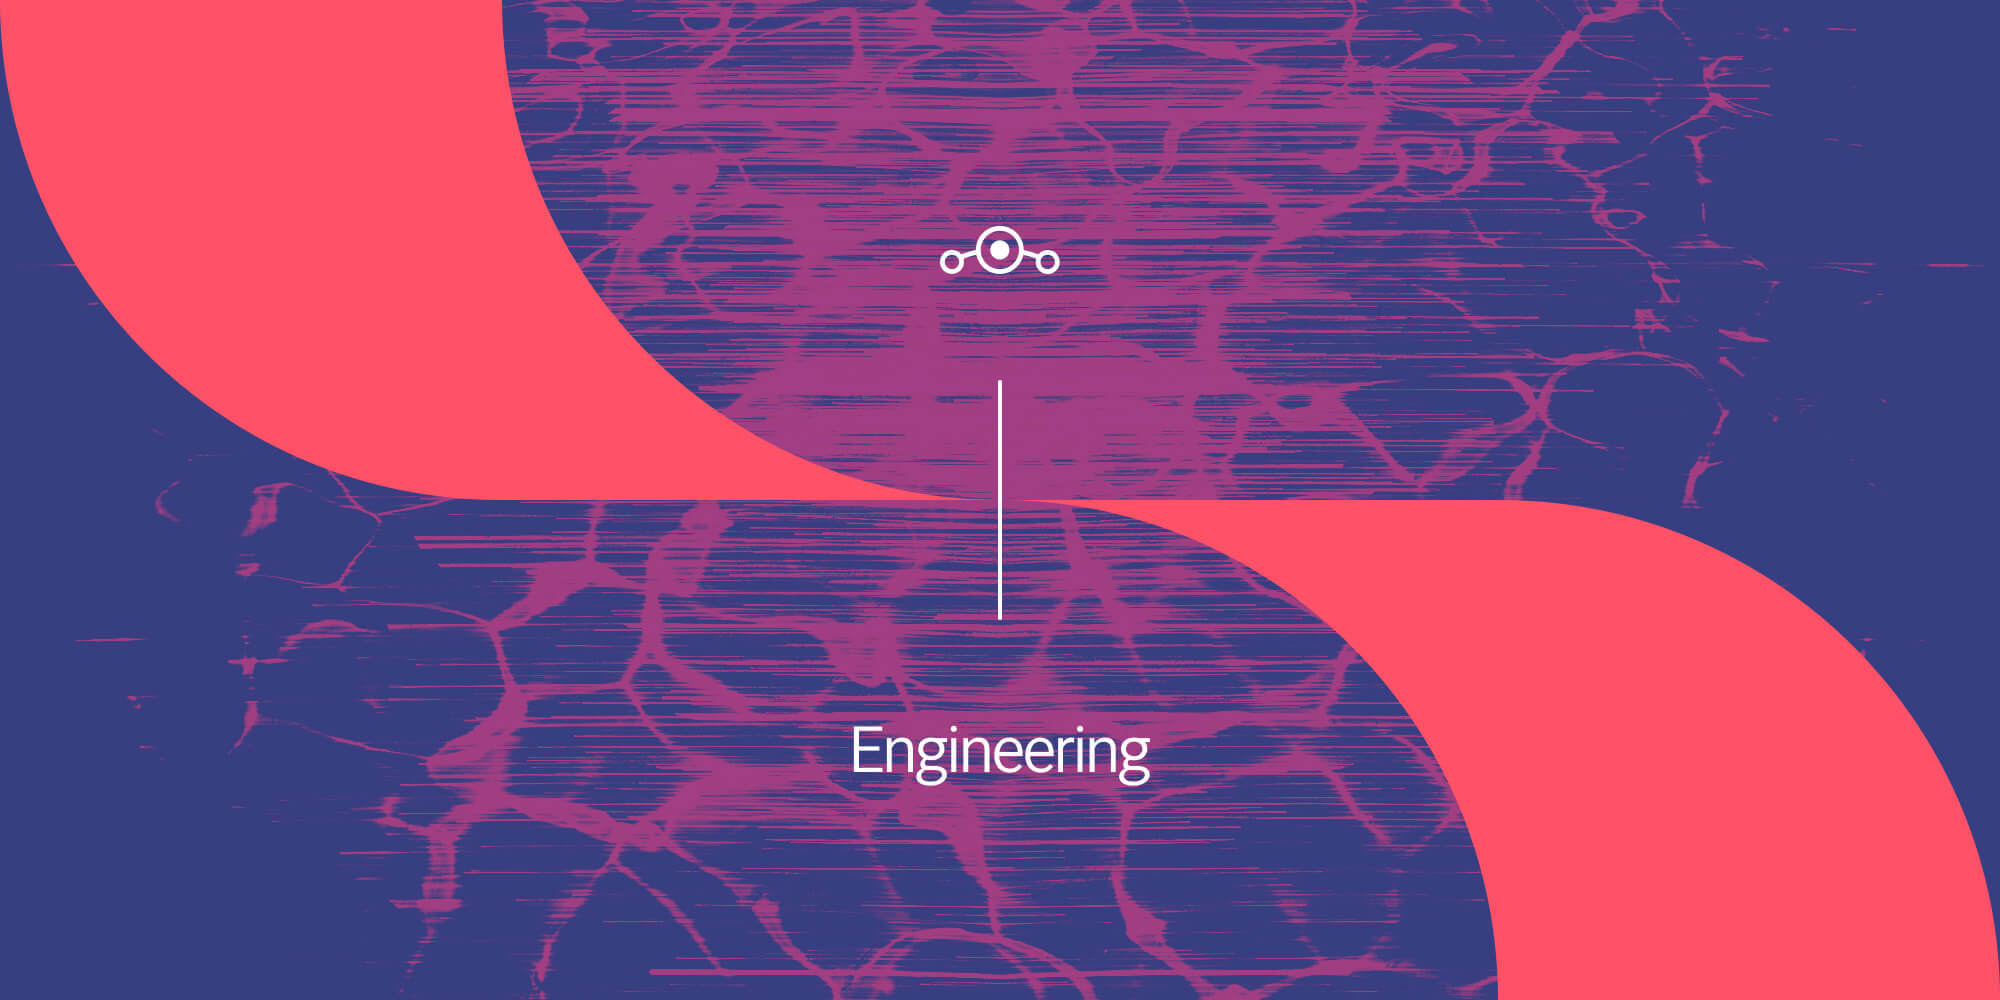 Fuchsia lines and waves interweave on a purple background as they spill out from the middle. Large red shapes, the Lineage logo, and the word Engineering sit on top.